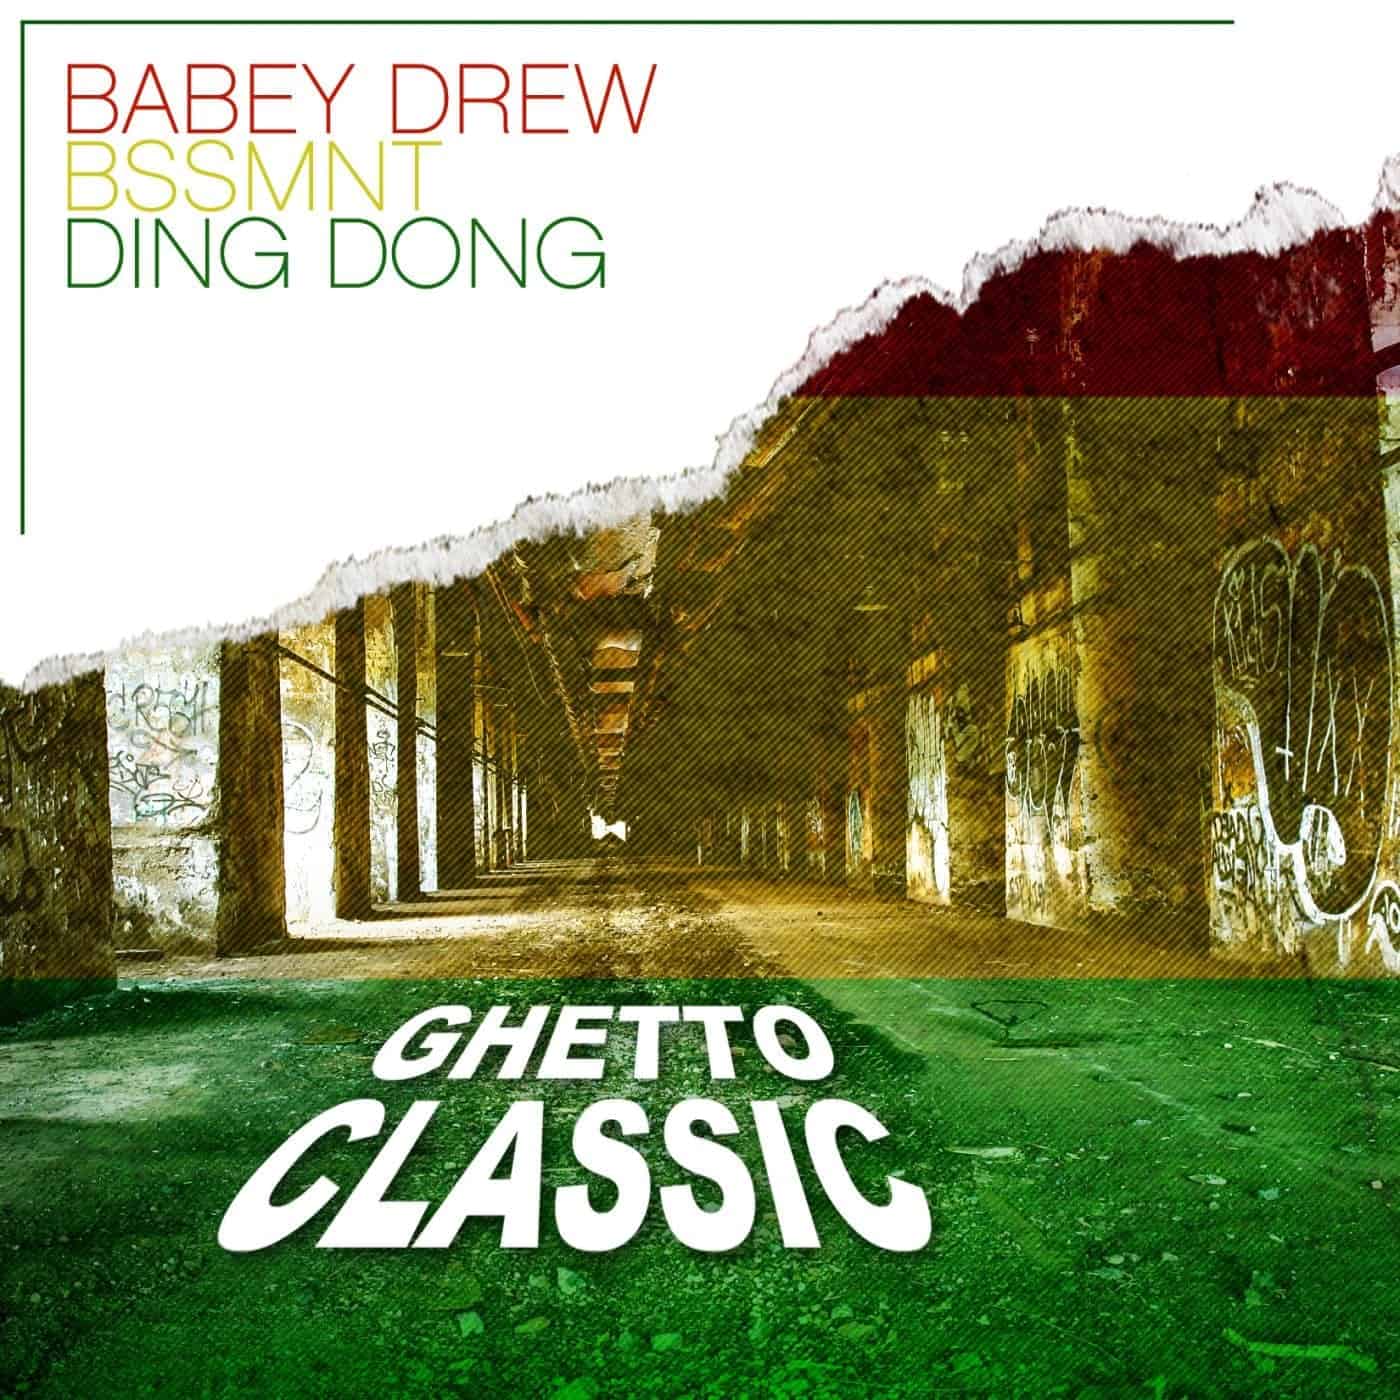 BSSMNT x Babey Drew x Ding Dong - Ghetto Classic (Clean)